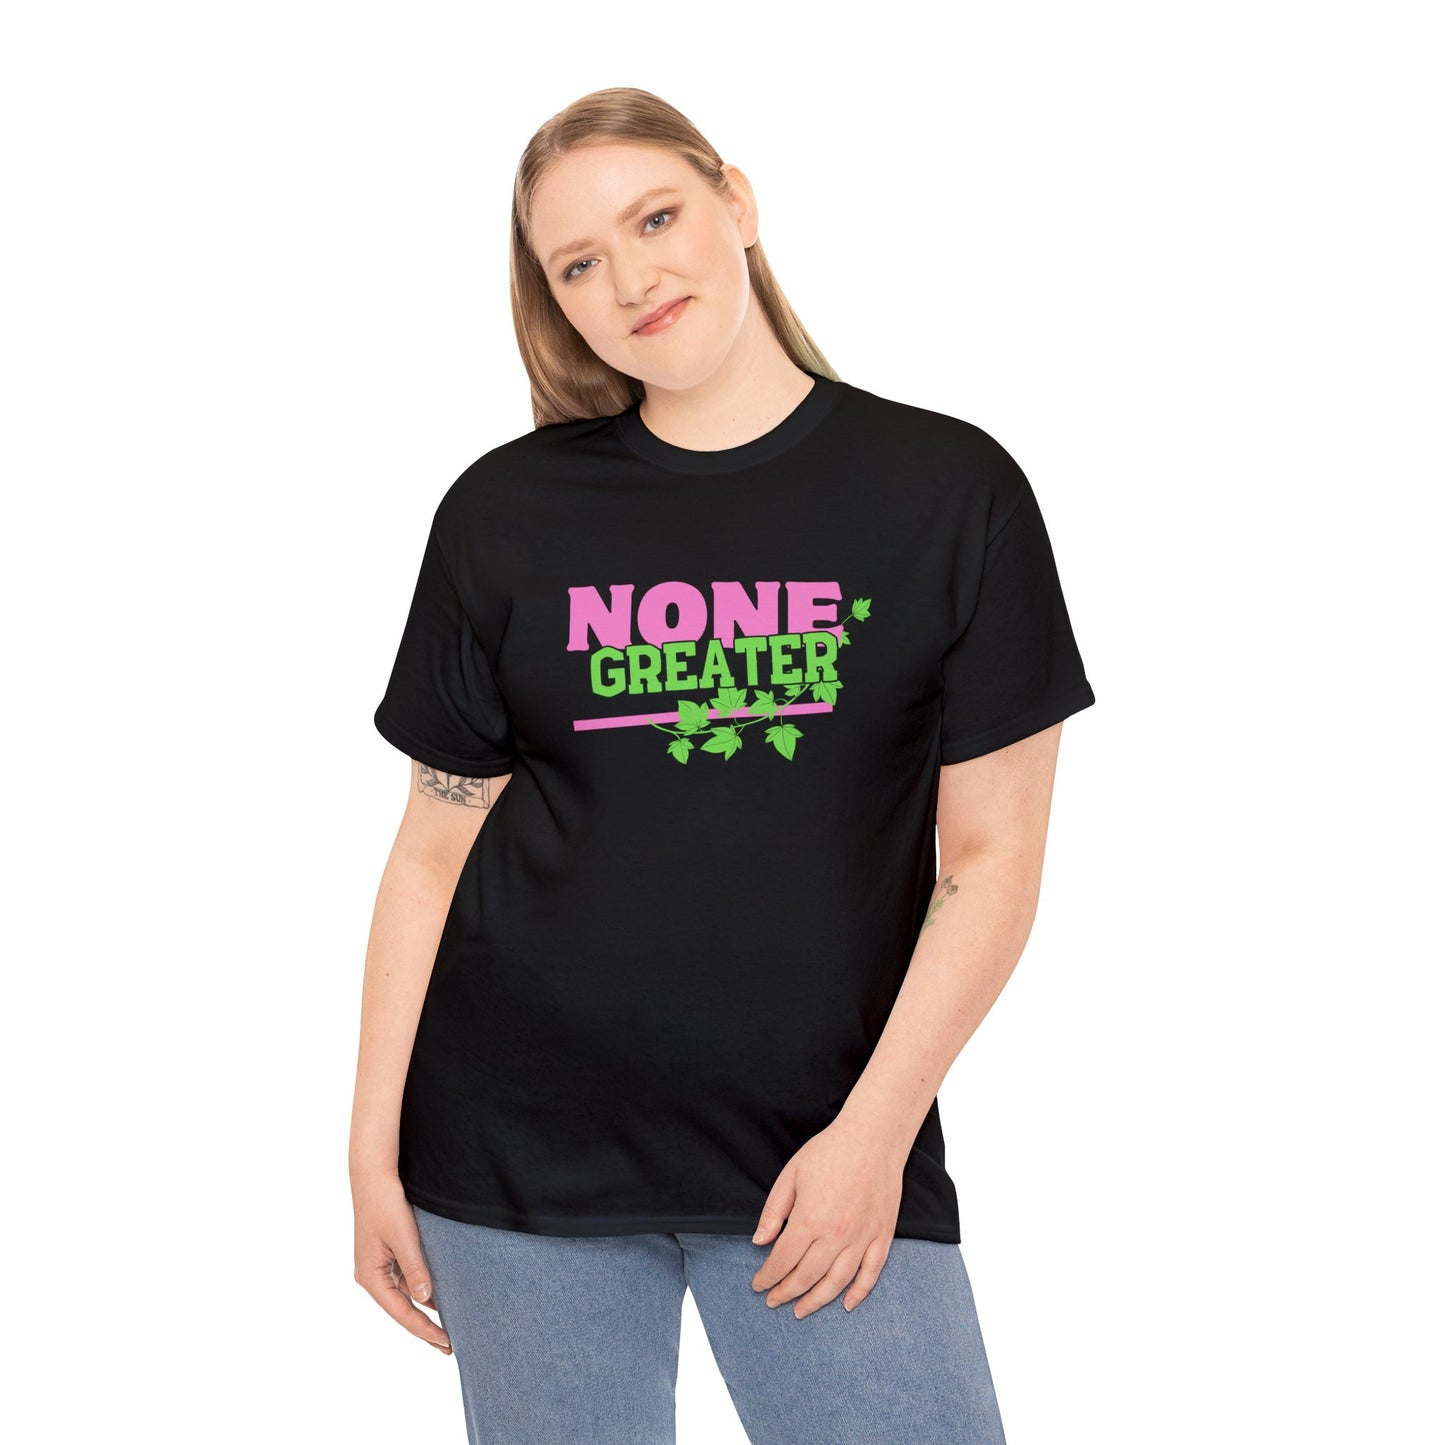 Black Unisex Heavy Cotton Tee saying "None Greater" in Pink/Green Letters w/Ivy Vine in background.